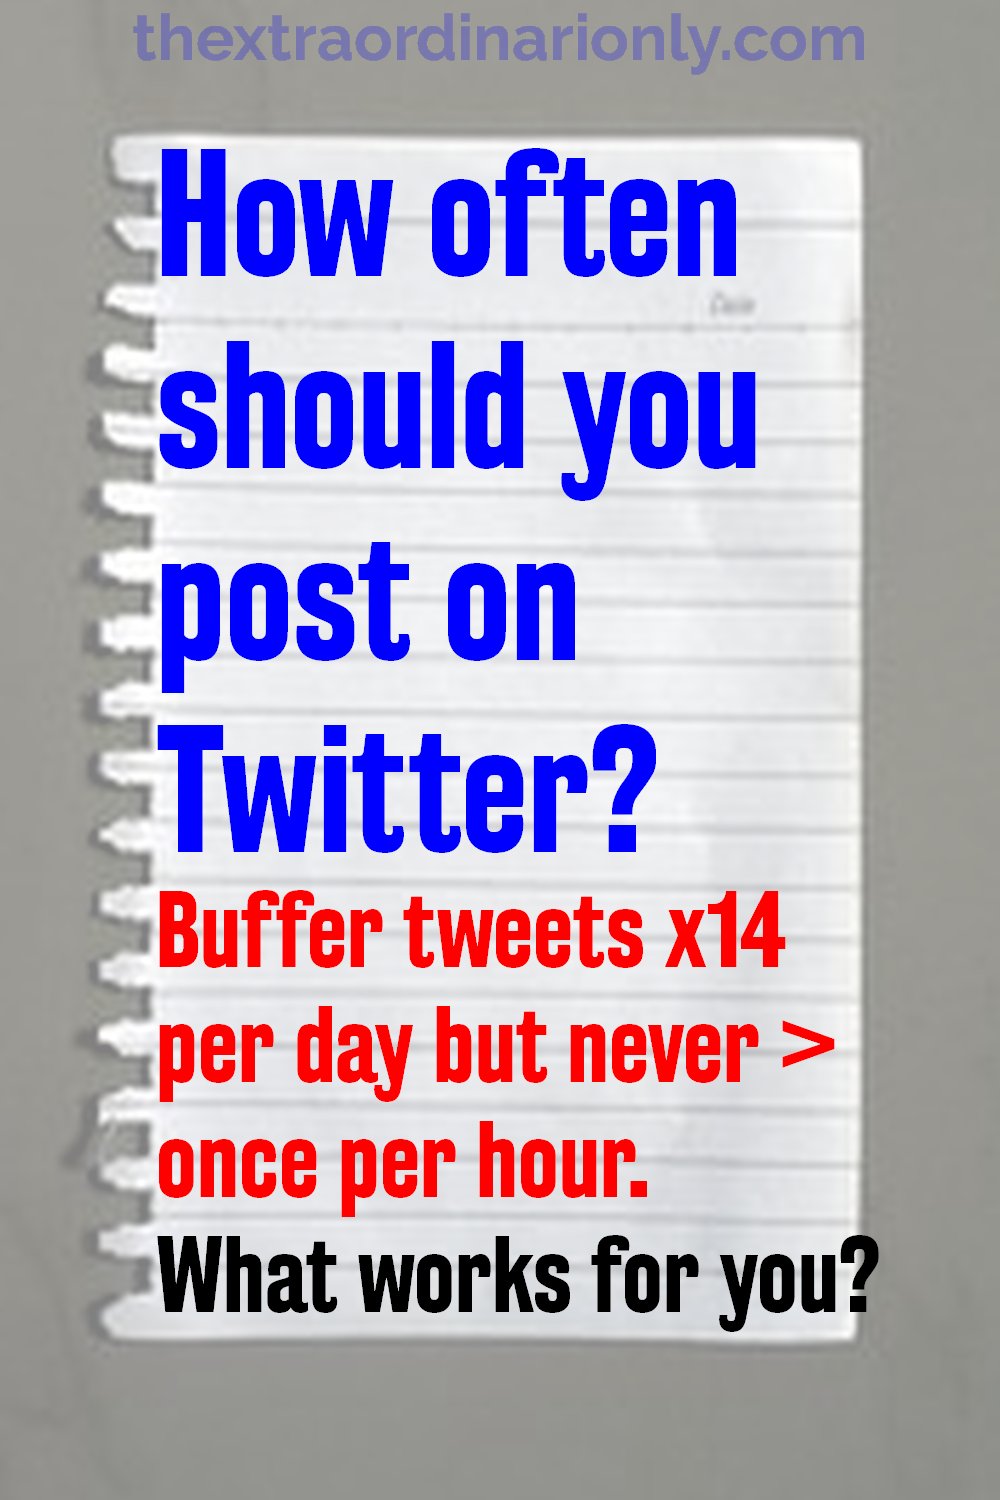 how often should you post on Twitter to favor half-life of a post on Twitter